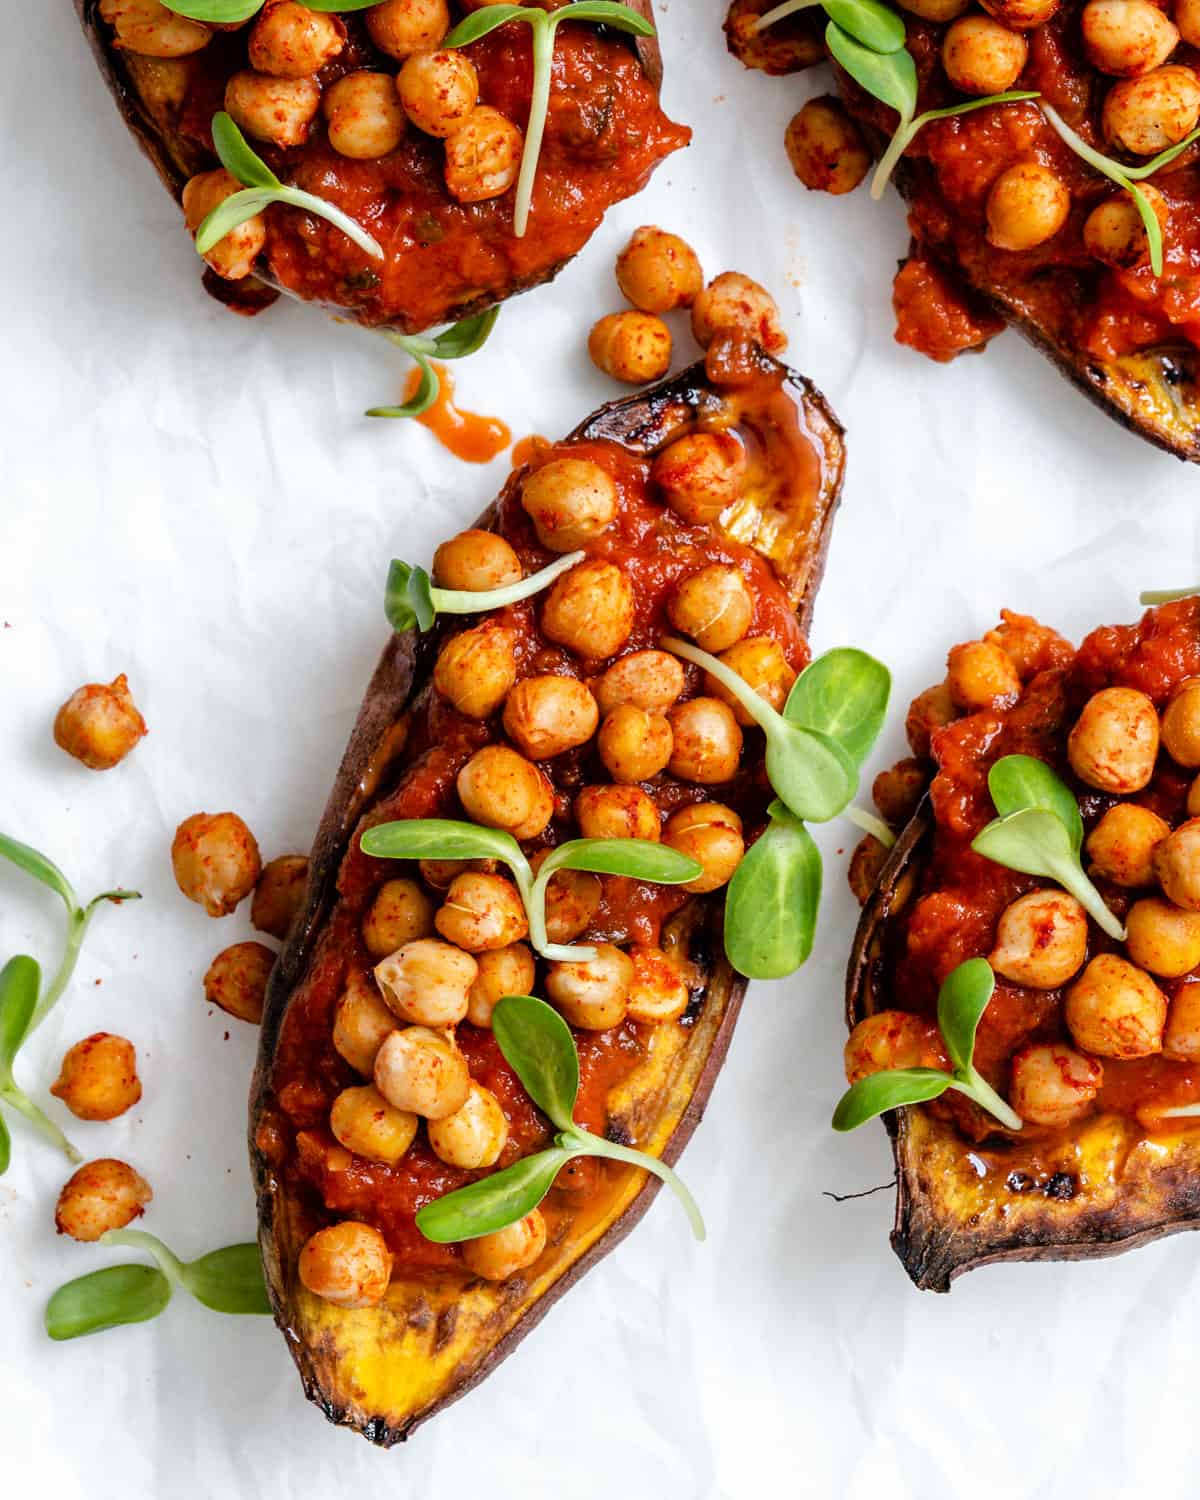 completed Chickpea Sweet Potato Boats against a white surface